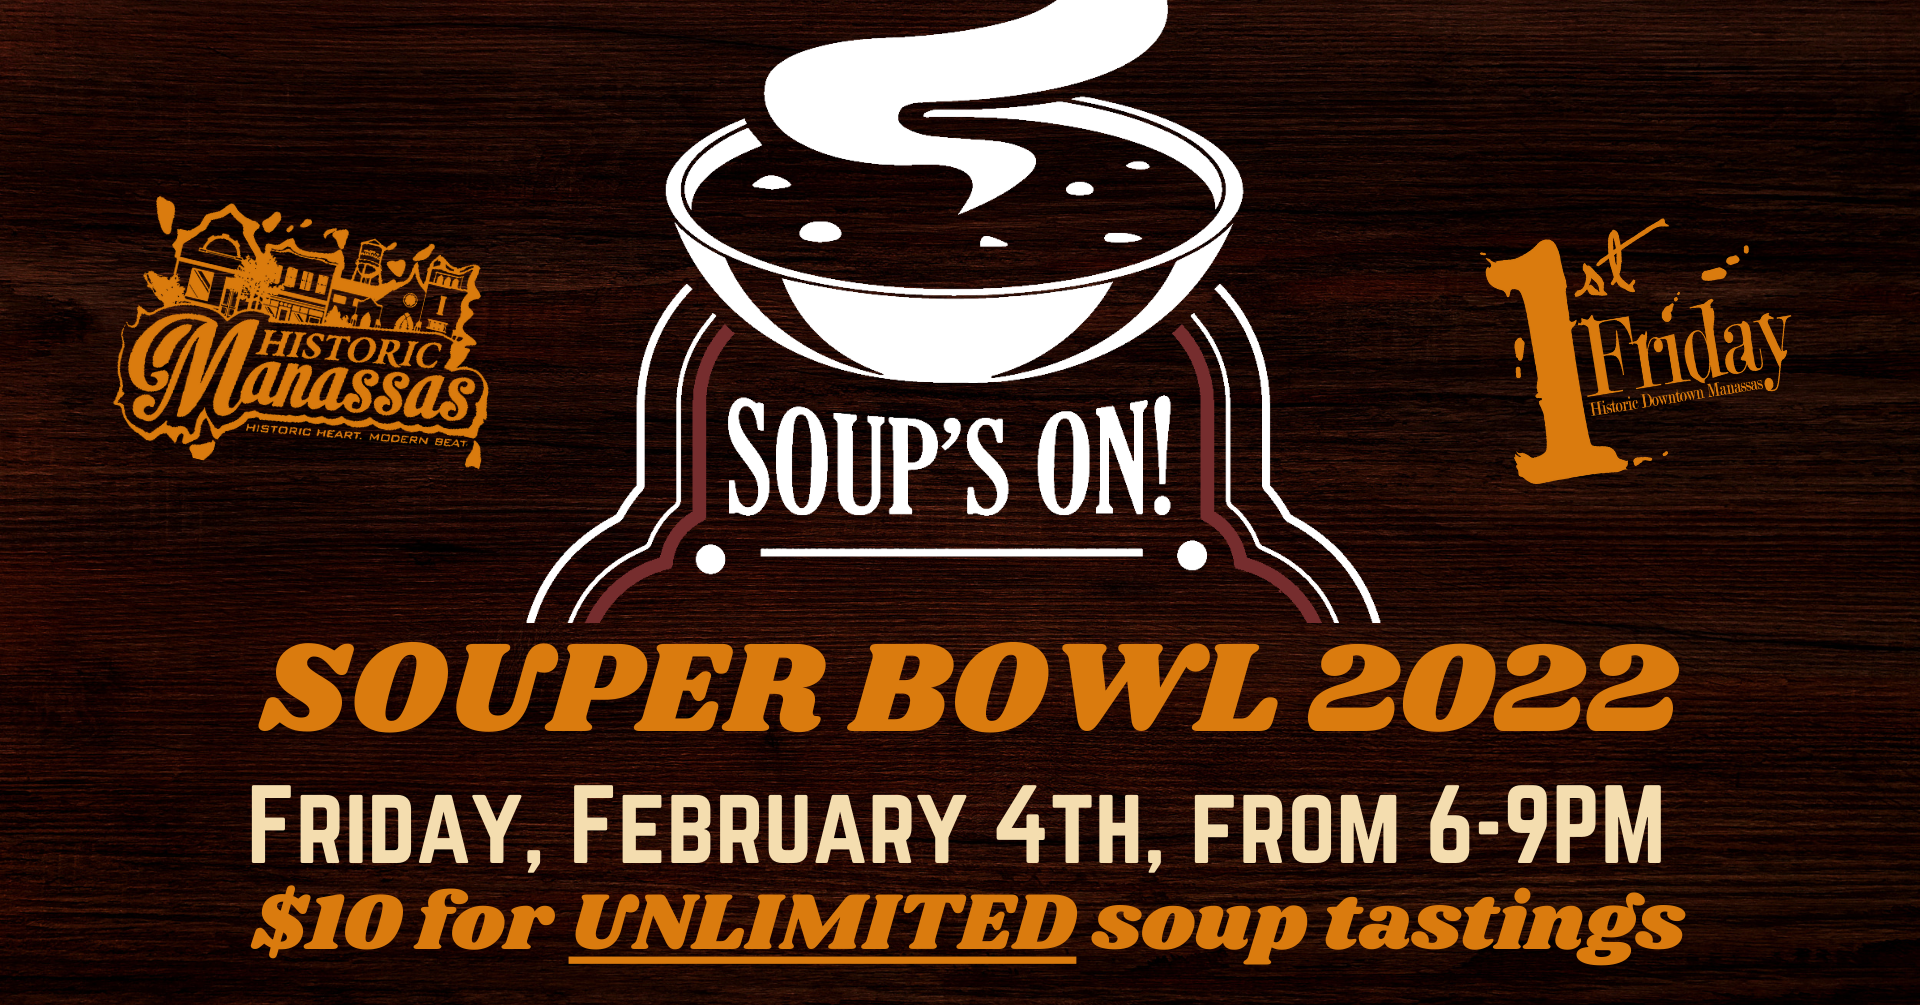 Souper Bowl Friday, February 4th 2021, unlimited tasting tickets for $10